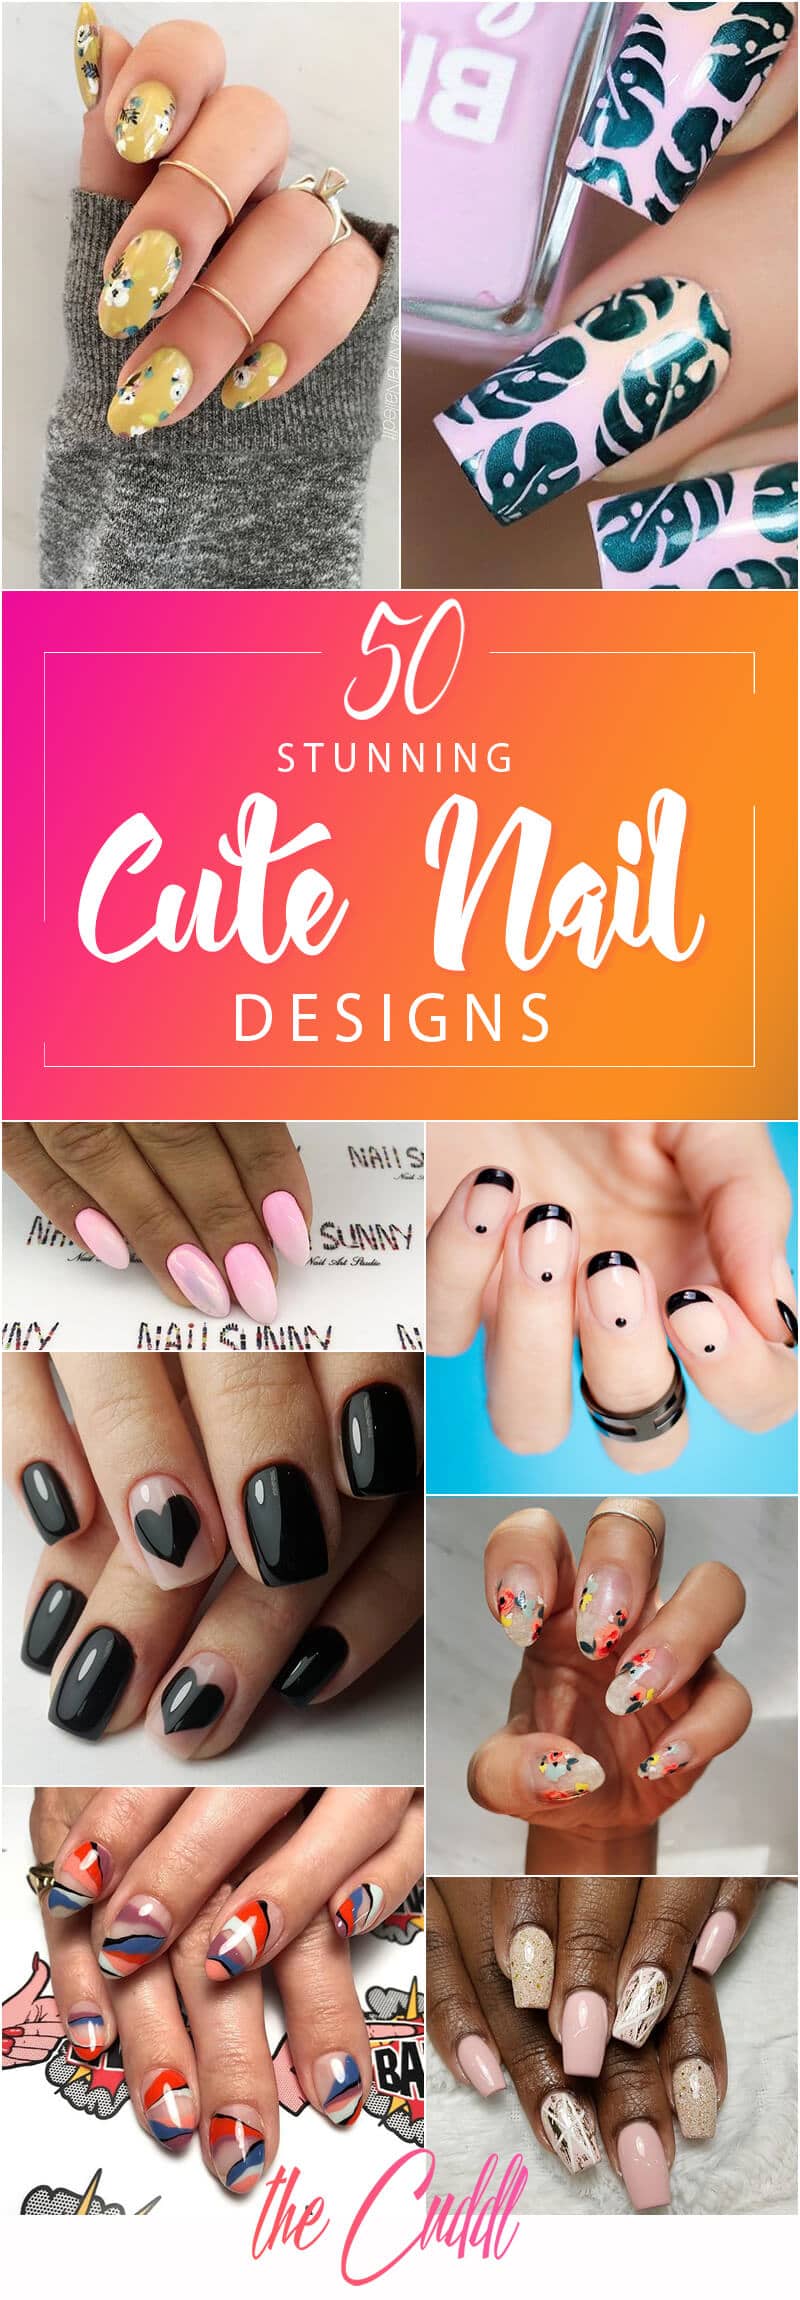 50 Catchy and Appealing Cute Nails for Fun-loving Women